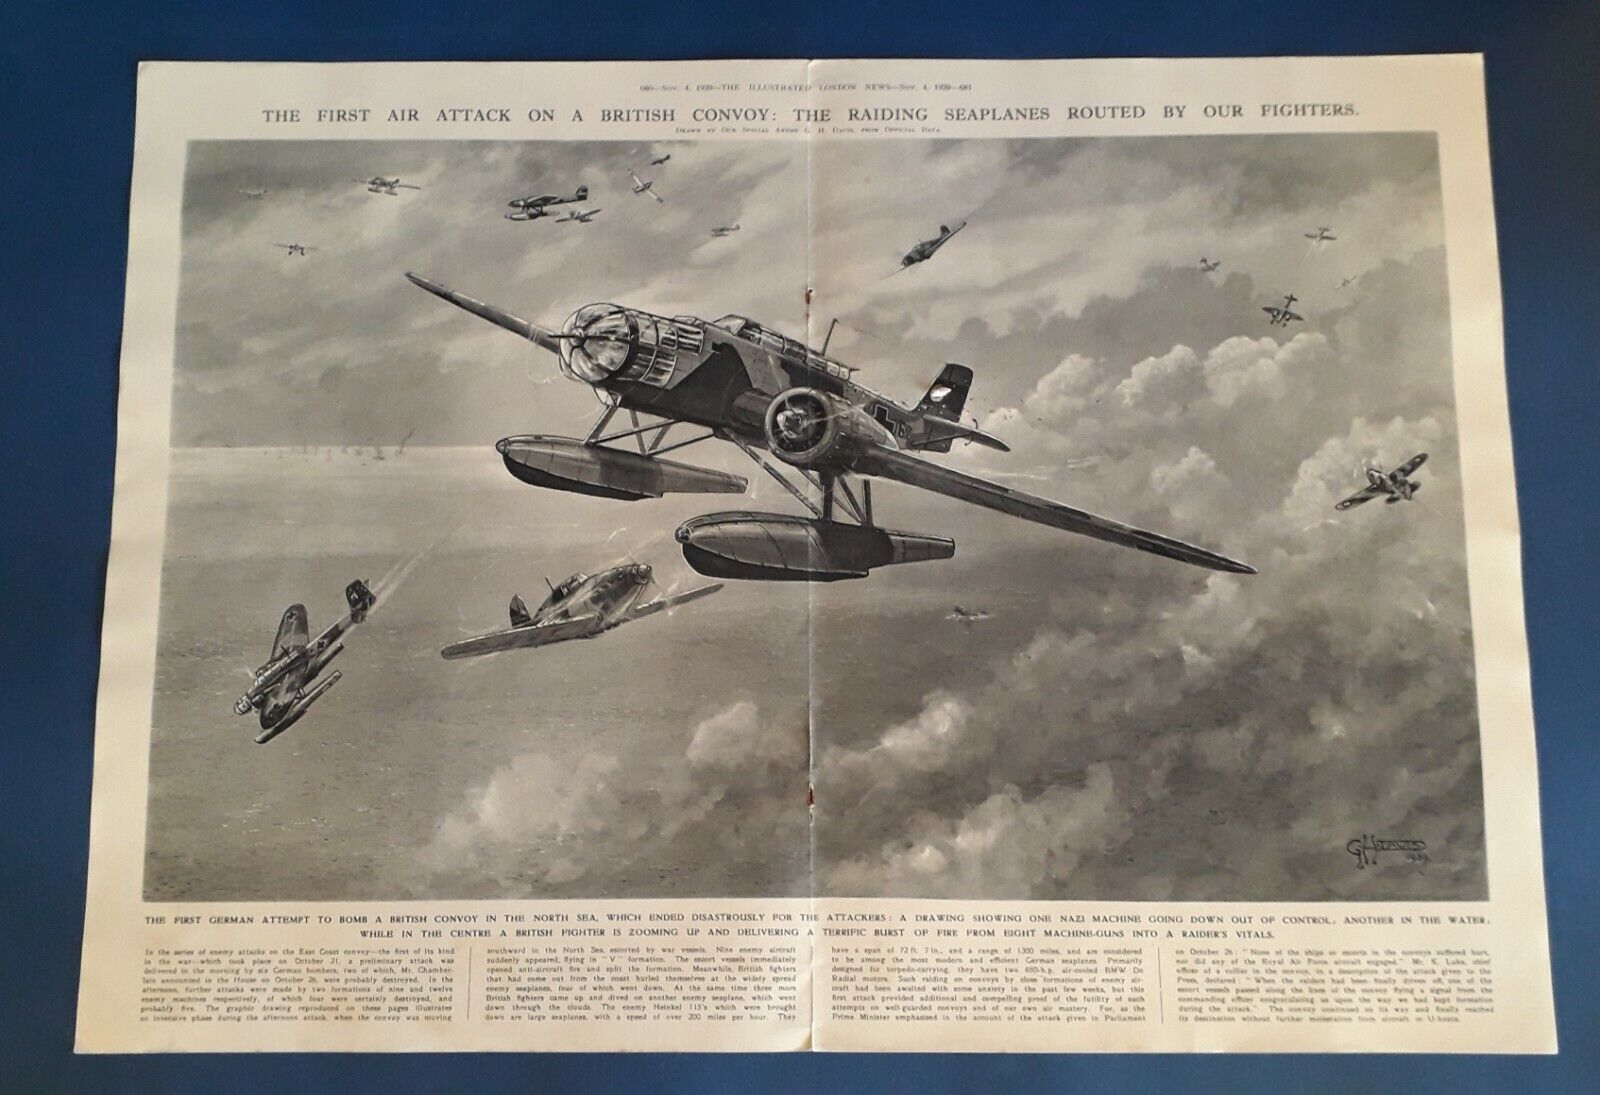 The Illustrated London News Nov 4, 1939 - Convoy Air Attack Poster by G.H.Davis